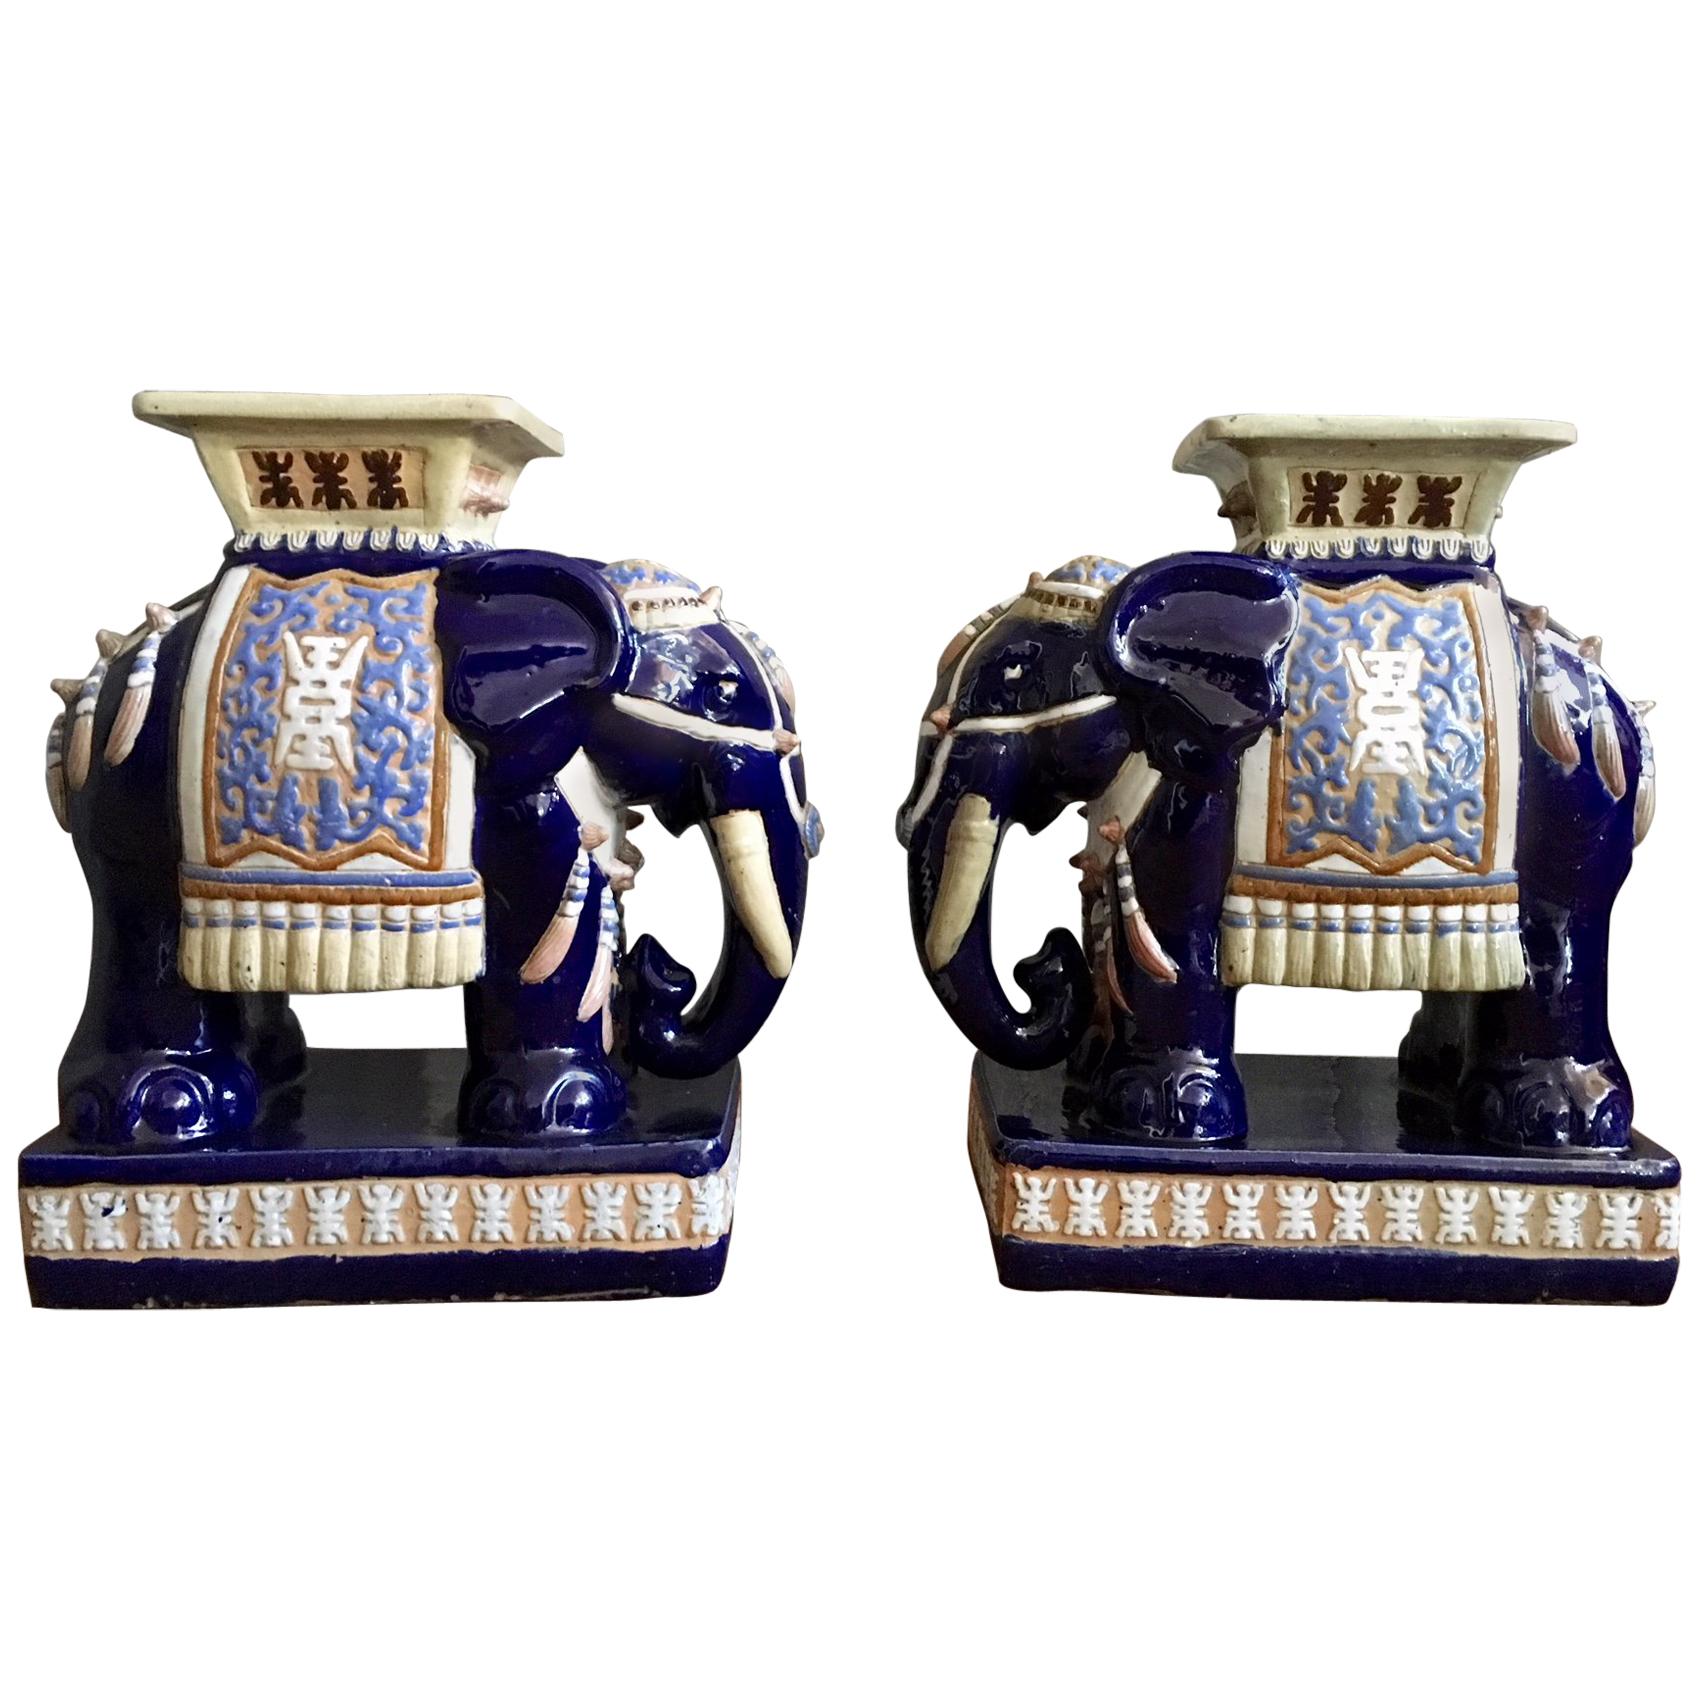 Pair of Oriental Elephant Stools or Drinking Tables from the 1970s